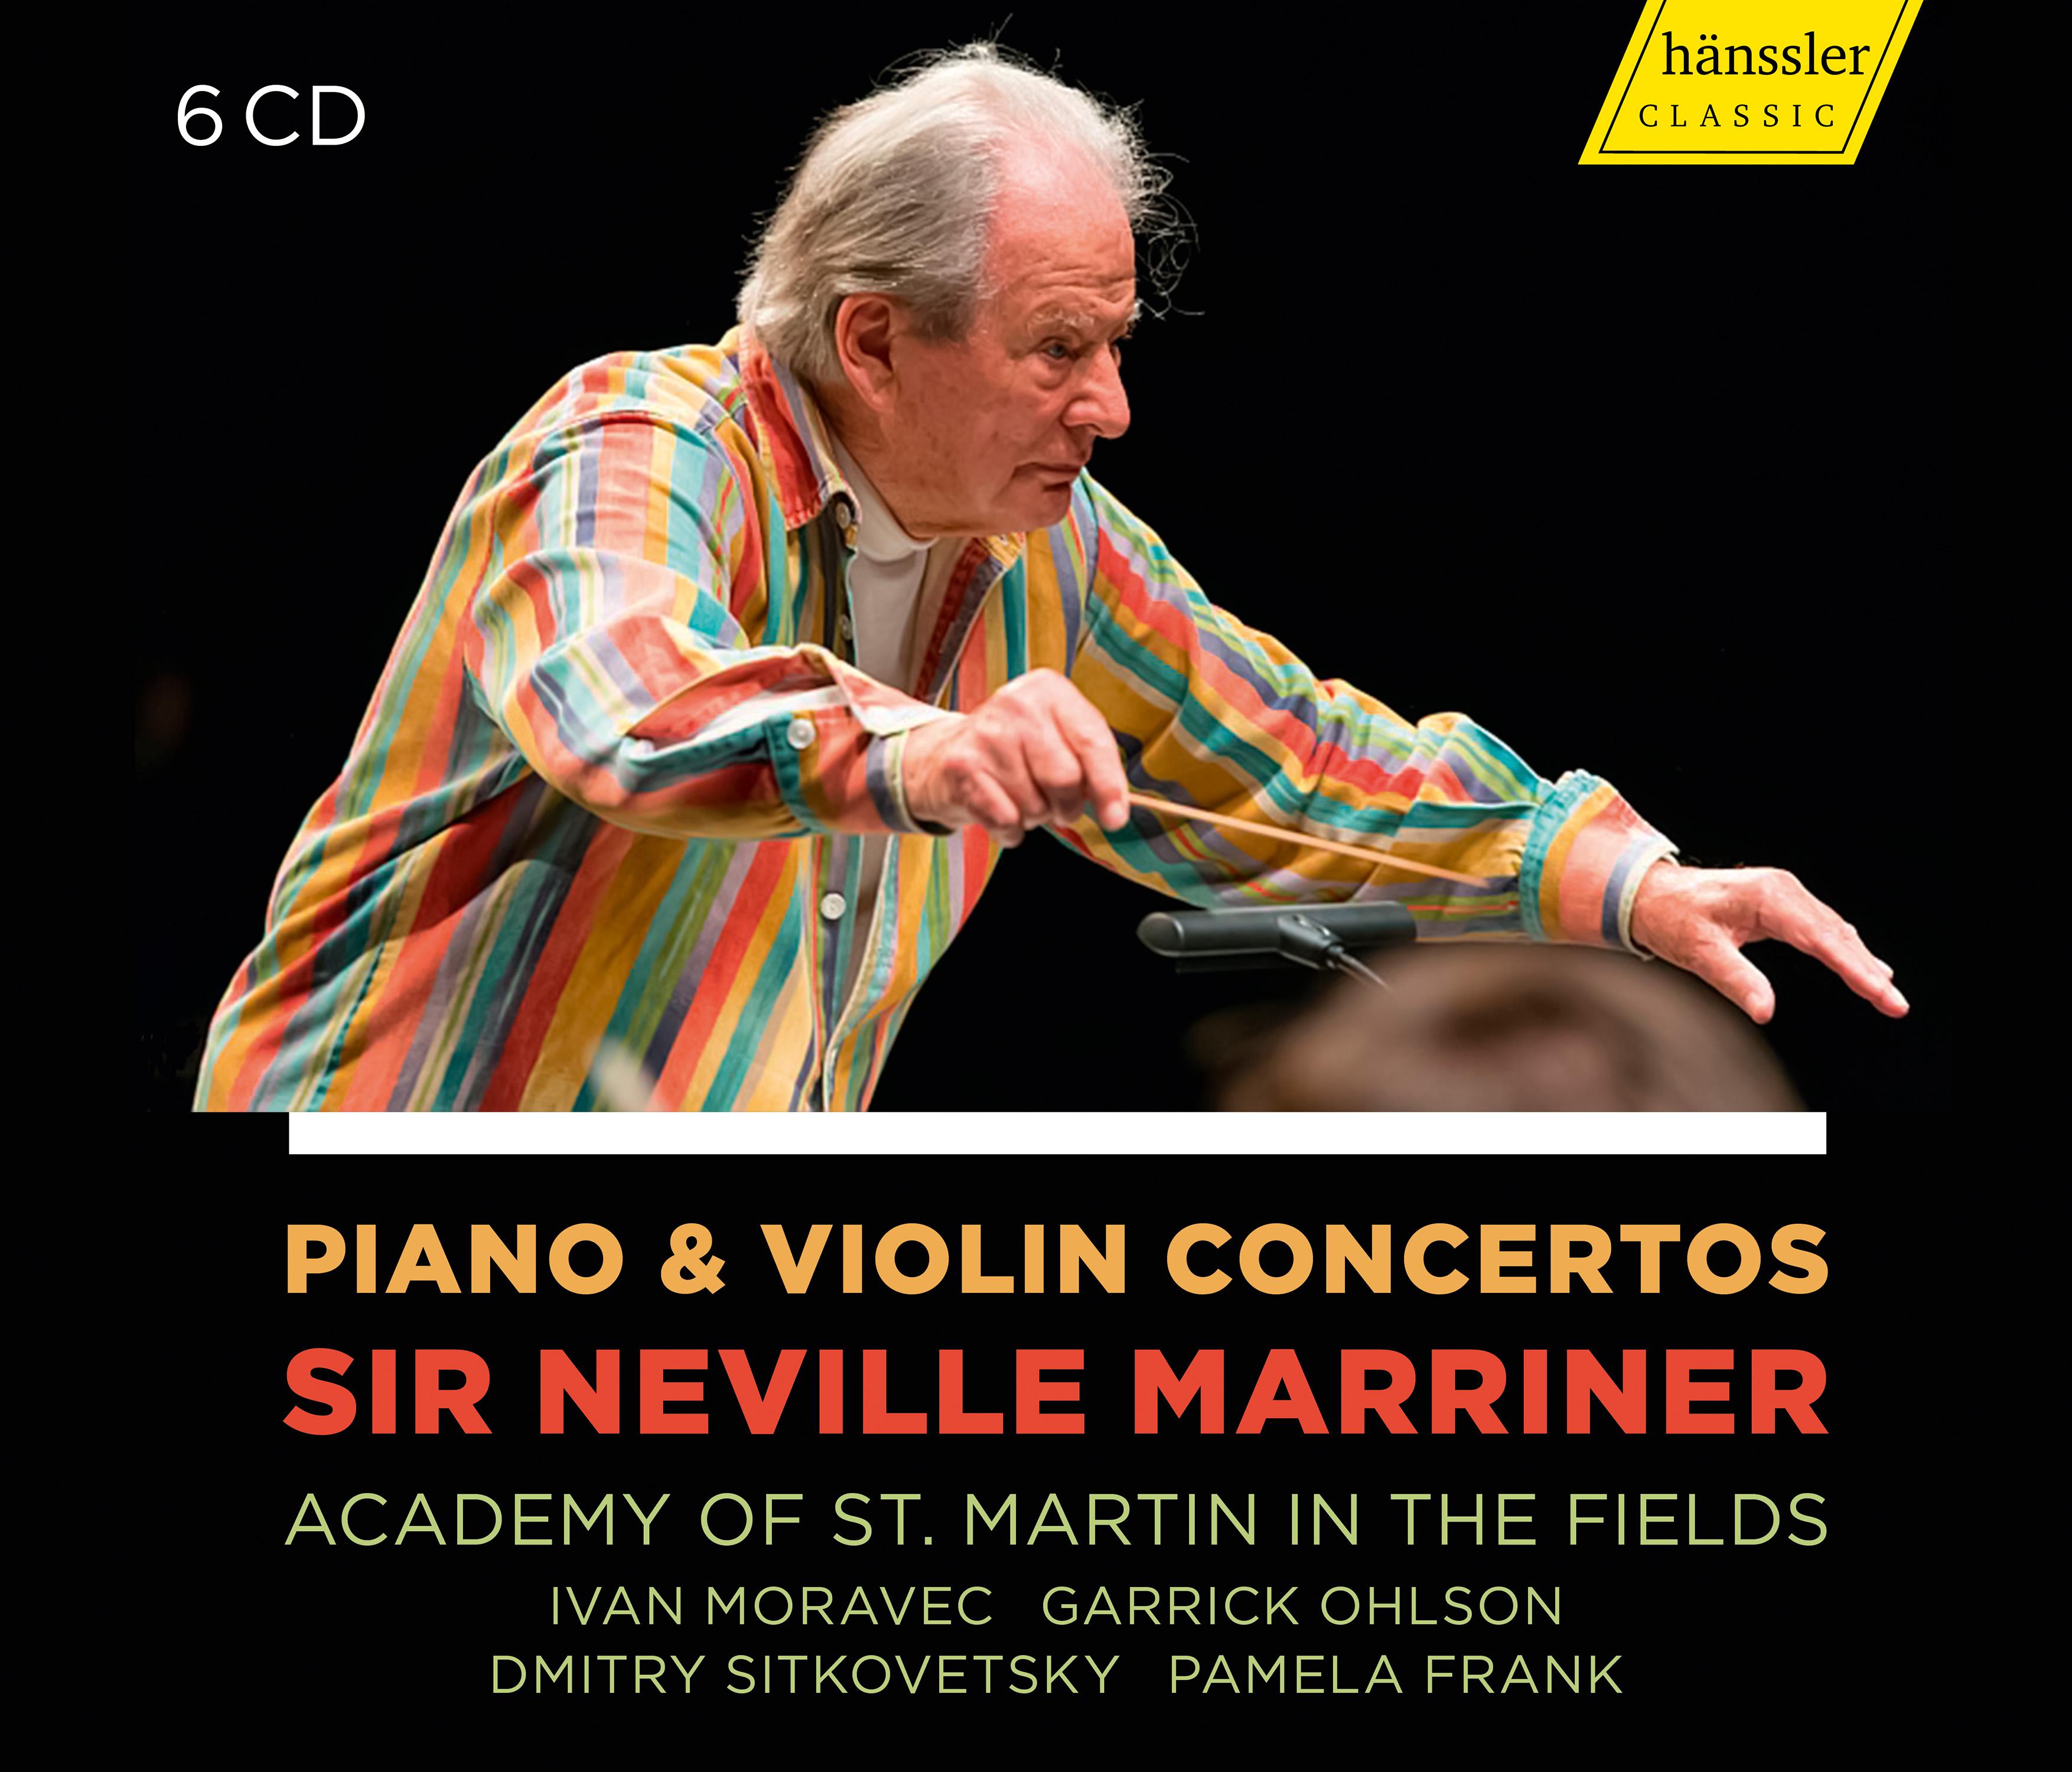 Piano & Violin Concertos - Sir Neville Marriner - Academy of St. Martin in the Fields